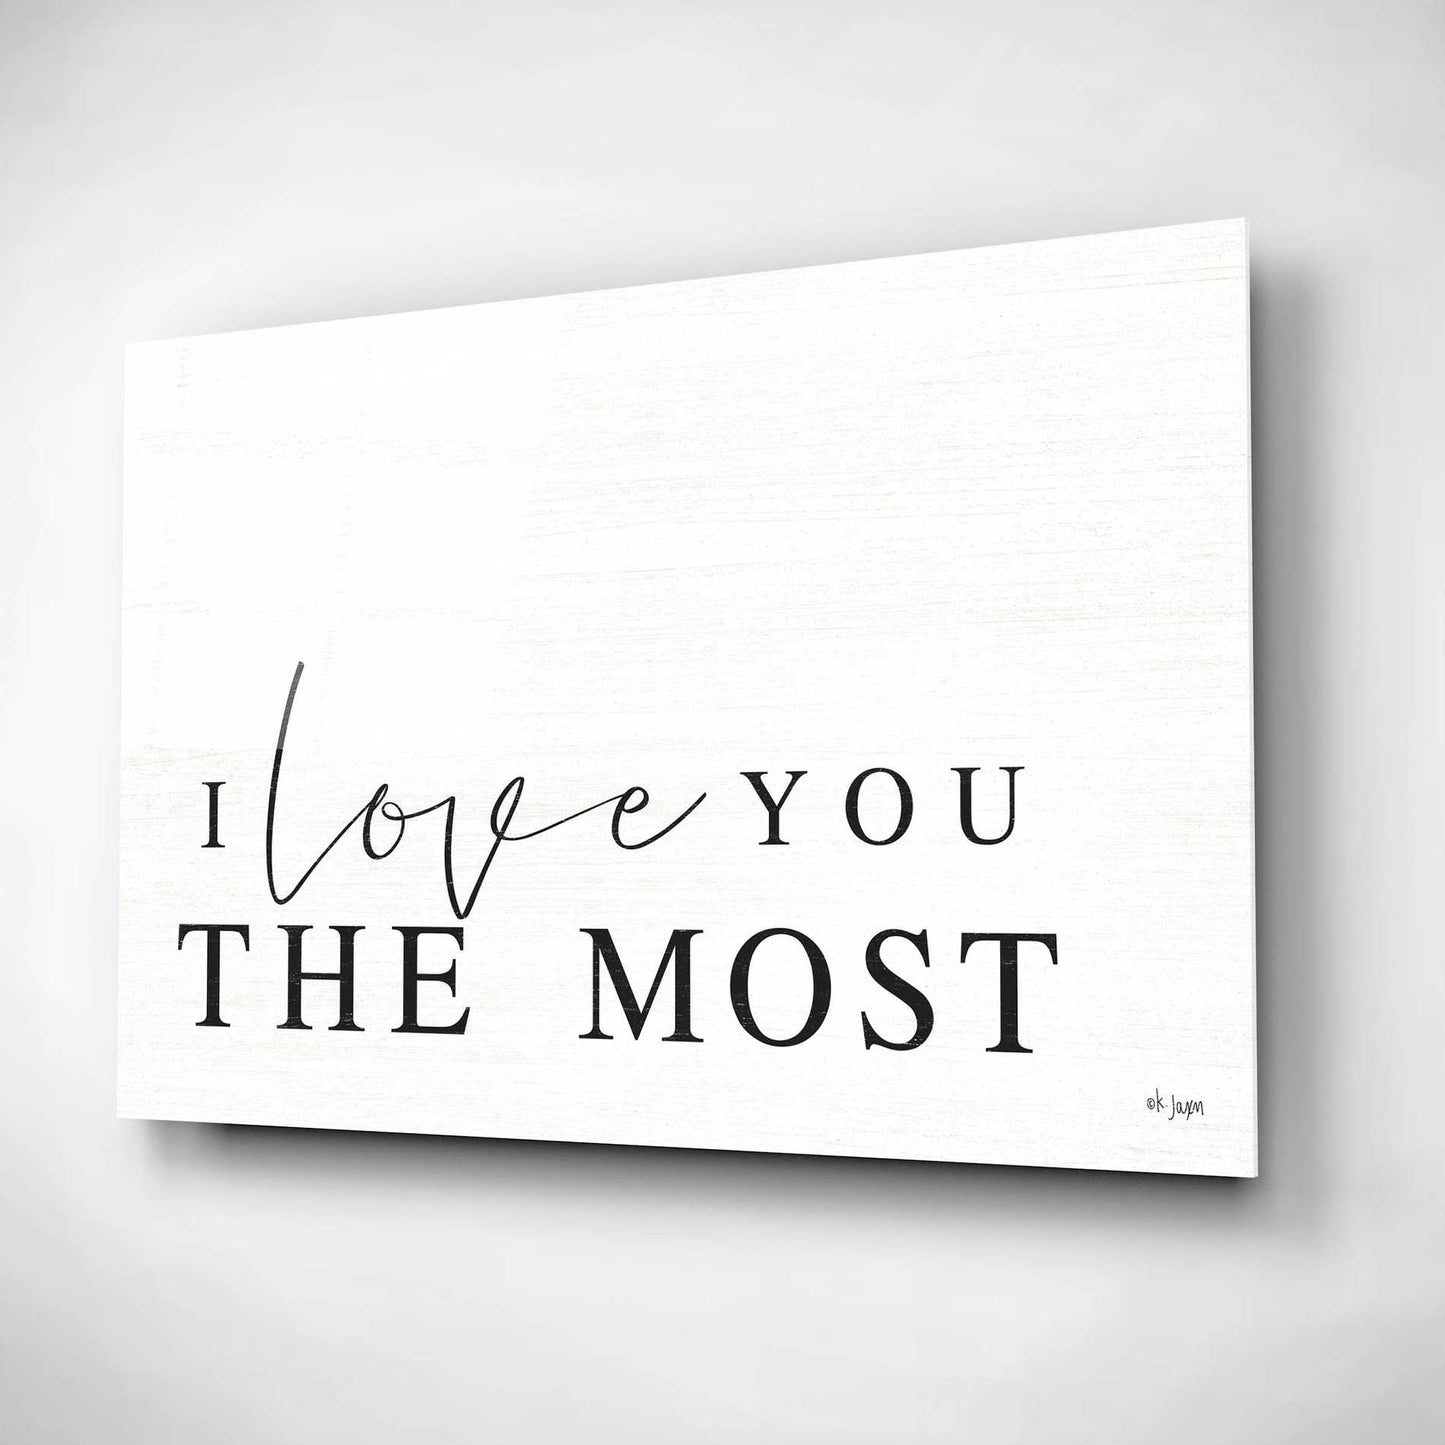 Epic Art 'I Love You the Most' by Jaxn Blvd, Acrylic Glass Wall Art,16x12